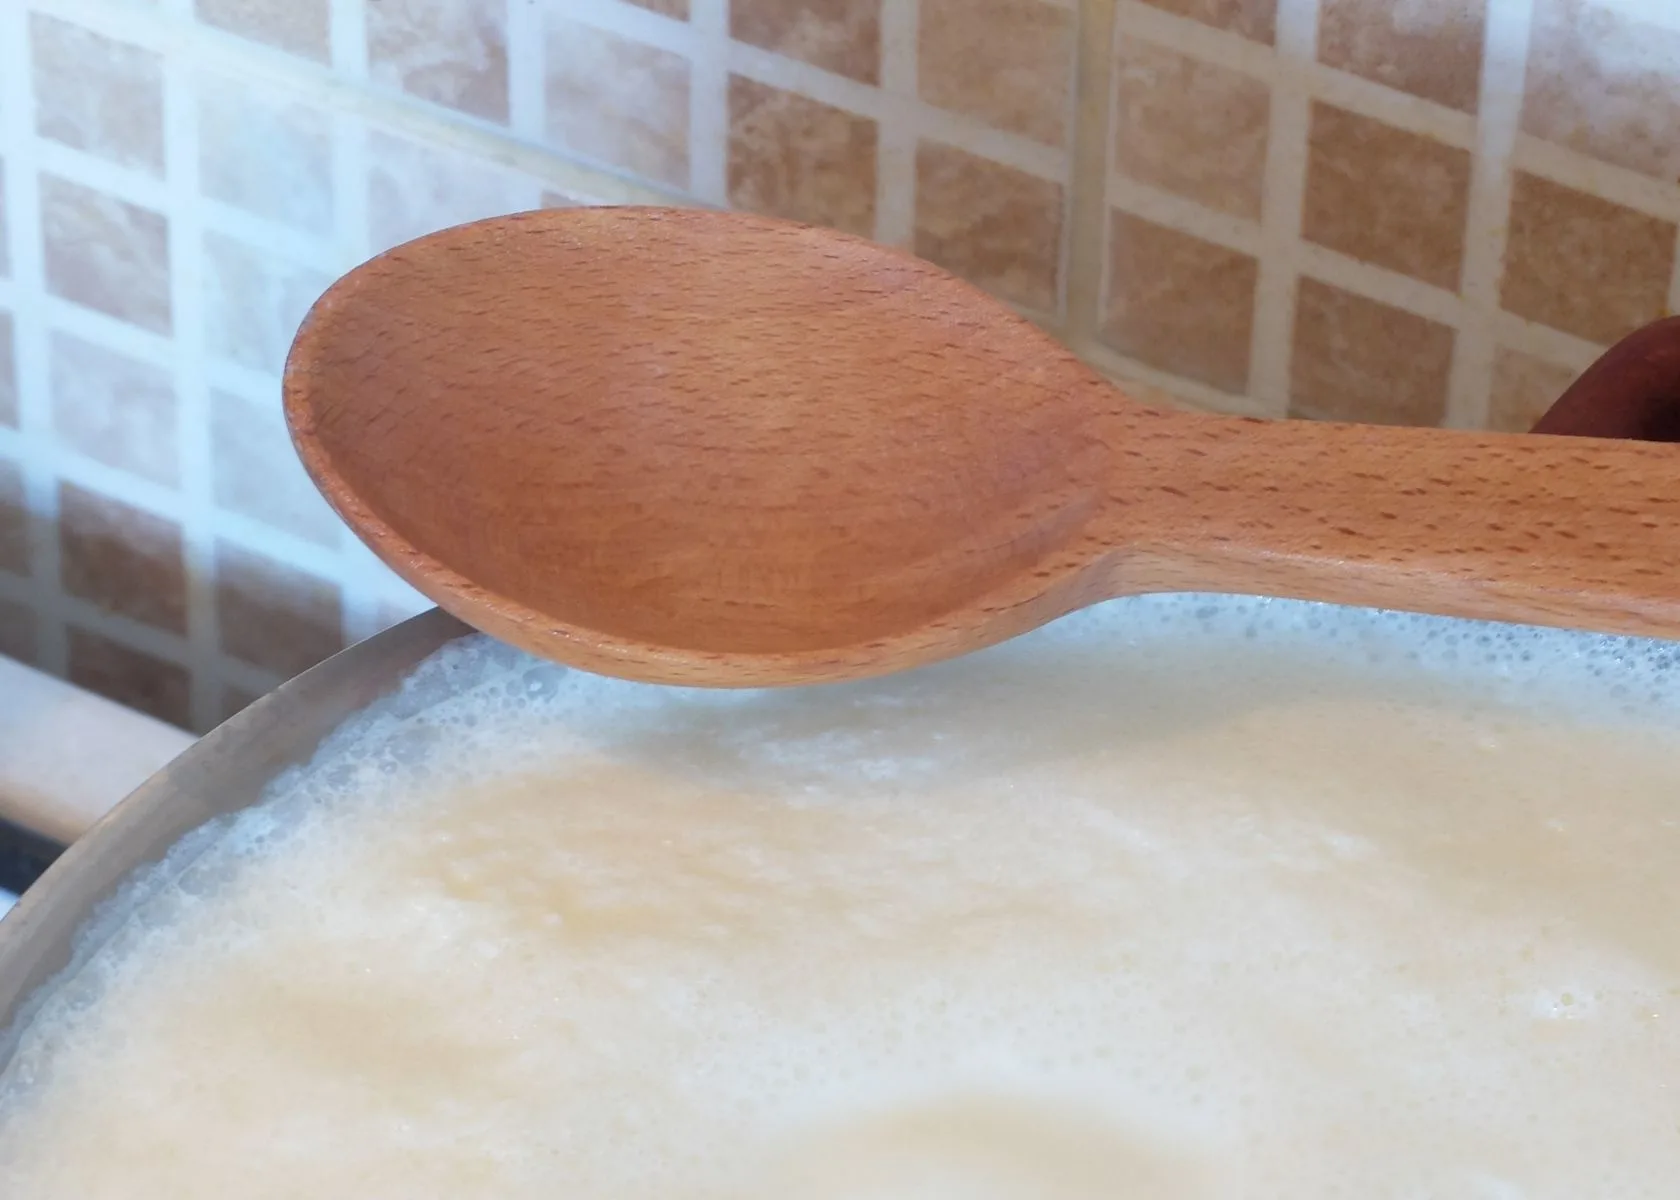 Homemade evaporated milk boiling in large stock pot with wooden spoon on top.